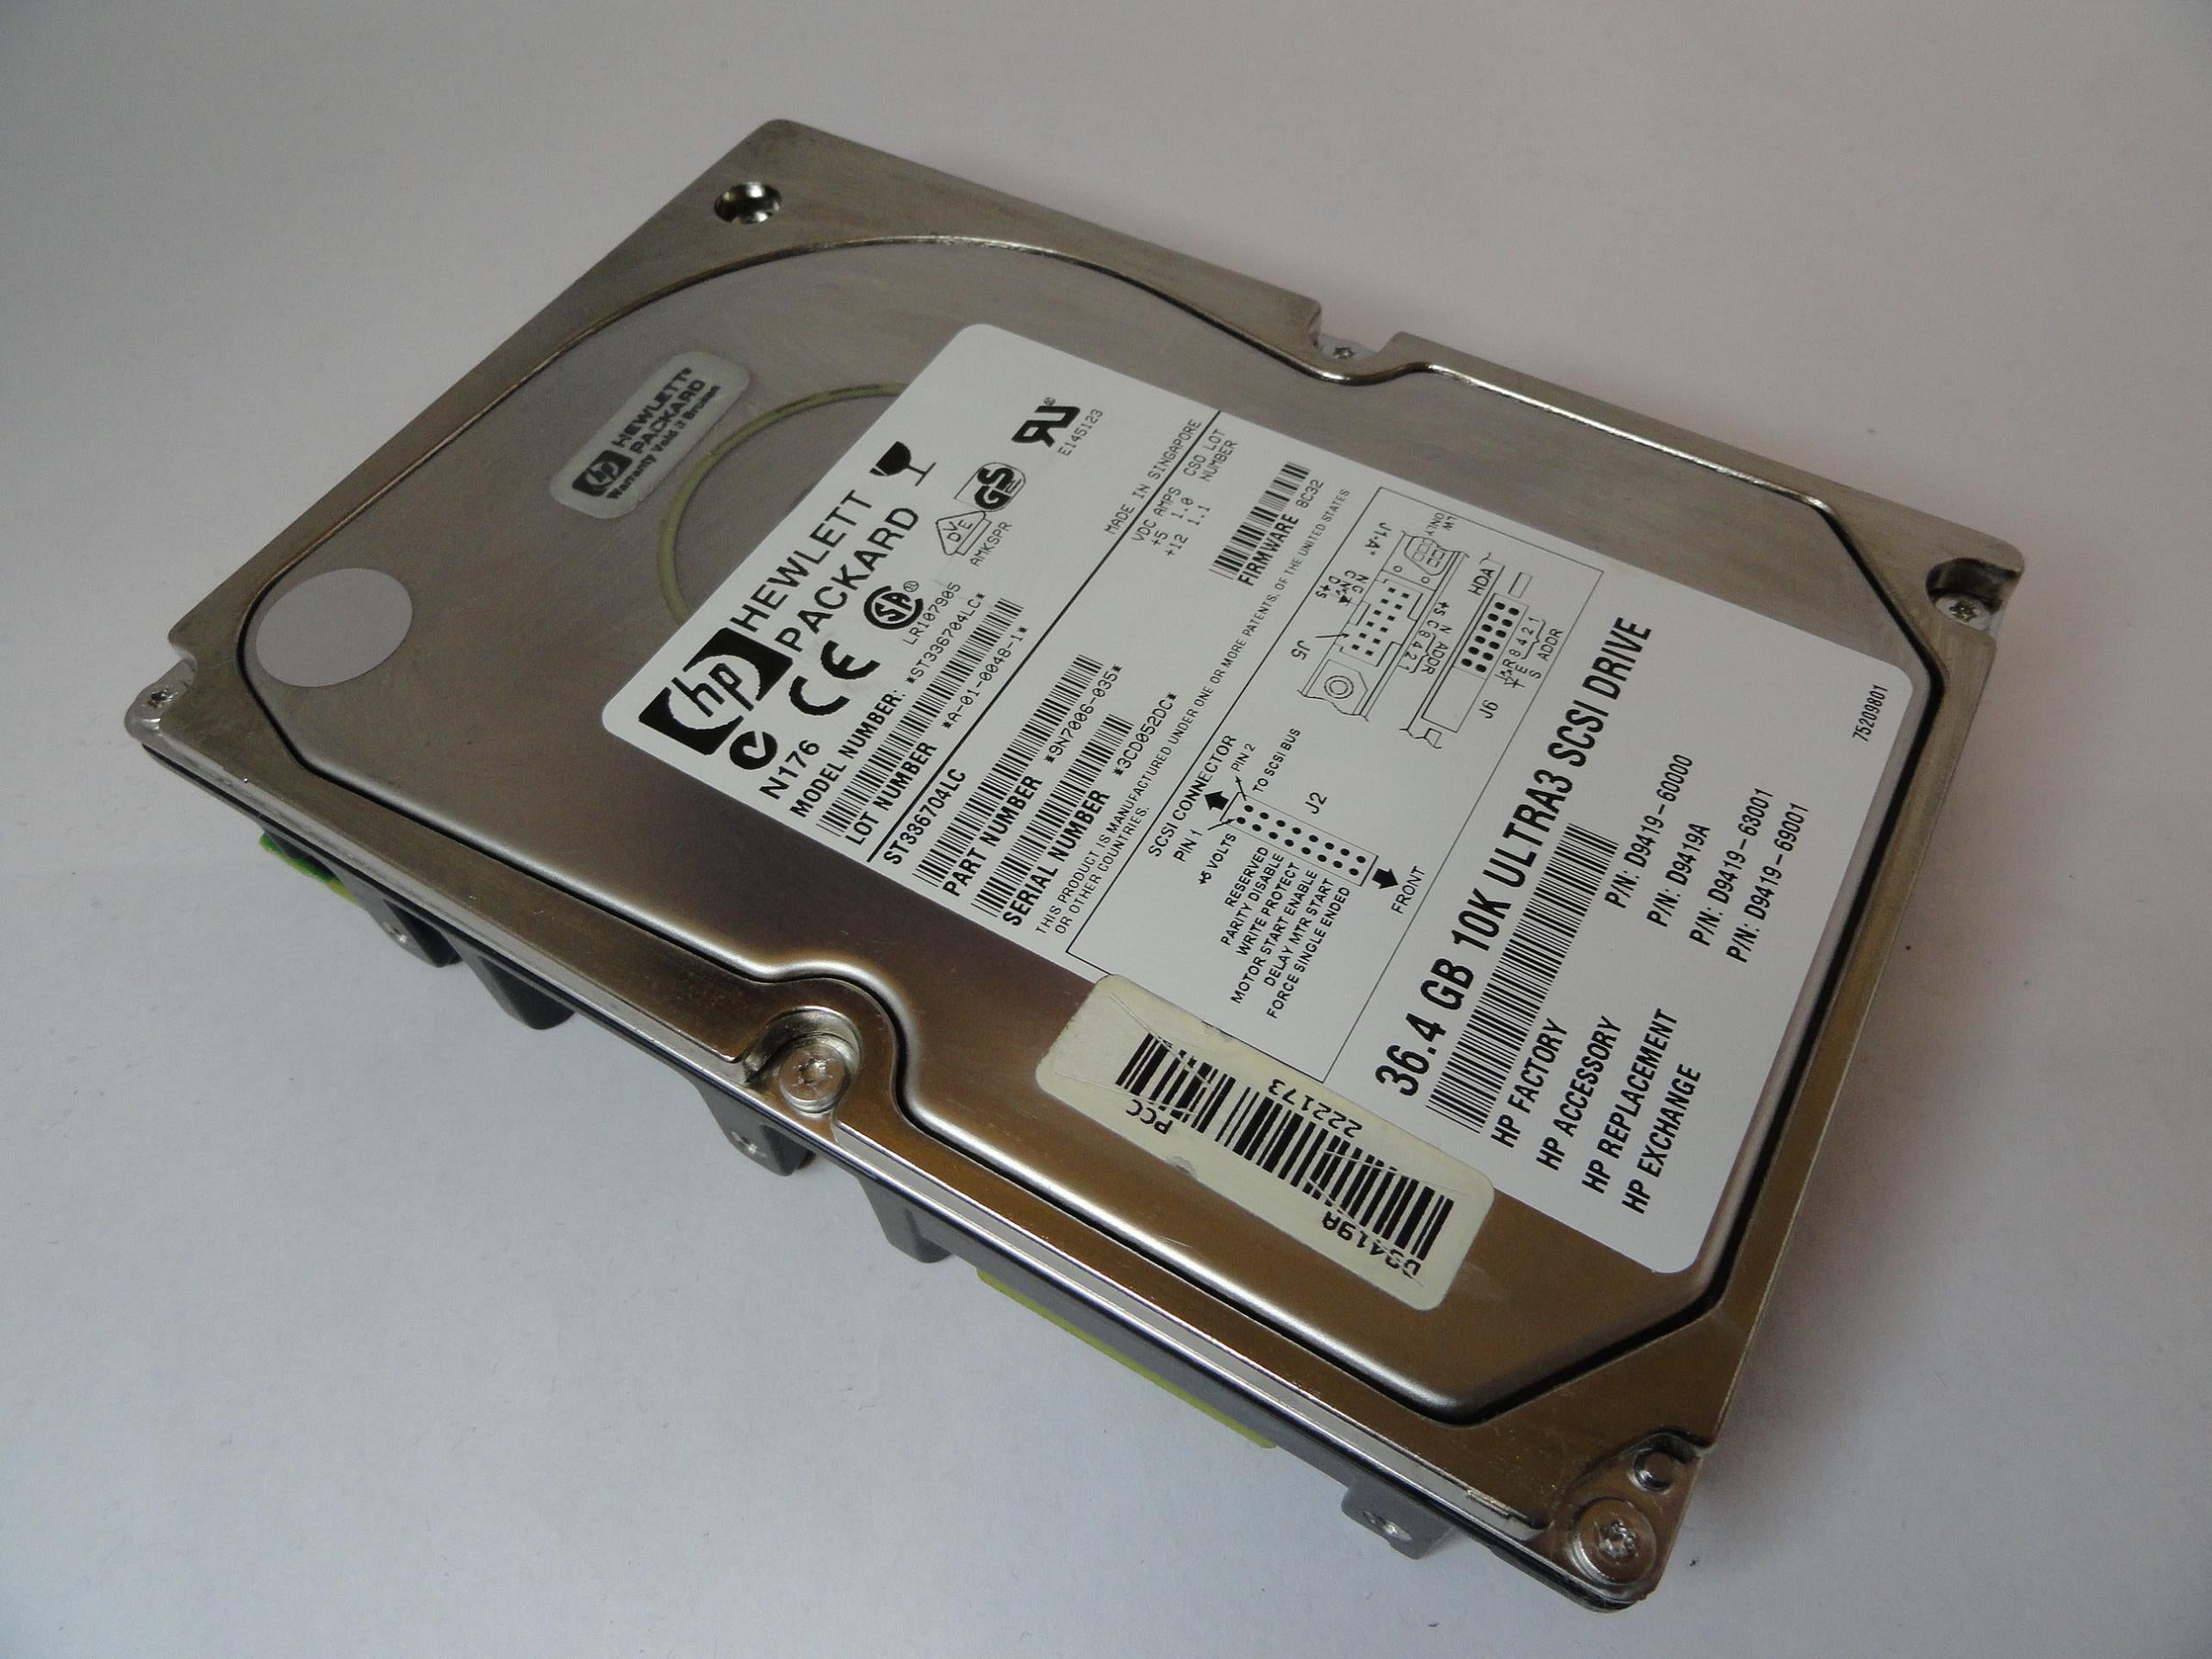 Seagate HP 36Gb SCSI 80 Pin 10Krpm 3.5in HDD ( 9N7006-035 ST336704LC D9419-60000 D9419A D9419-63001 D9419-69001 ) USED